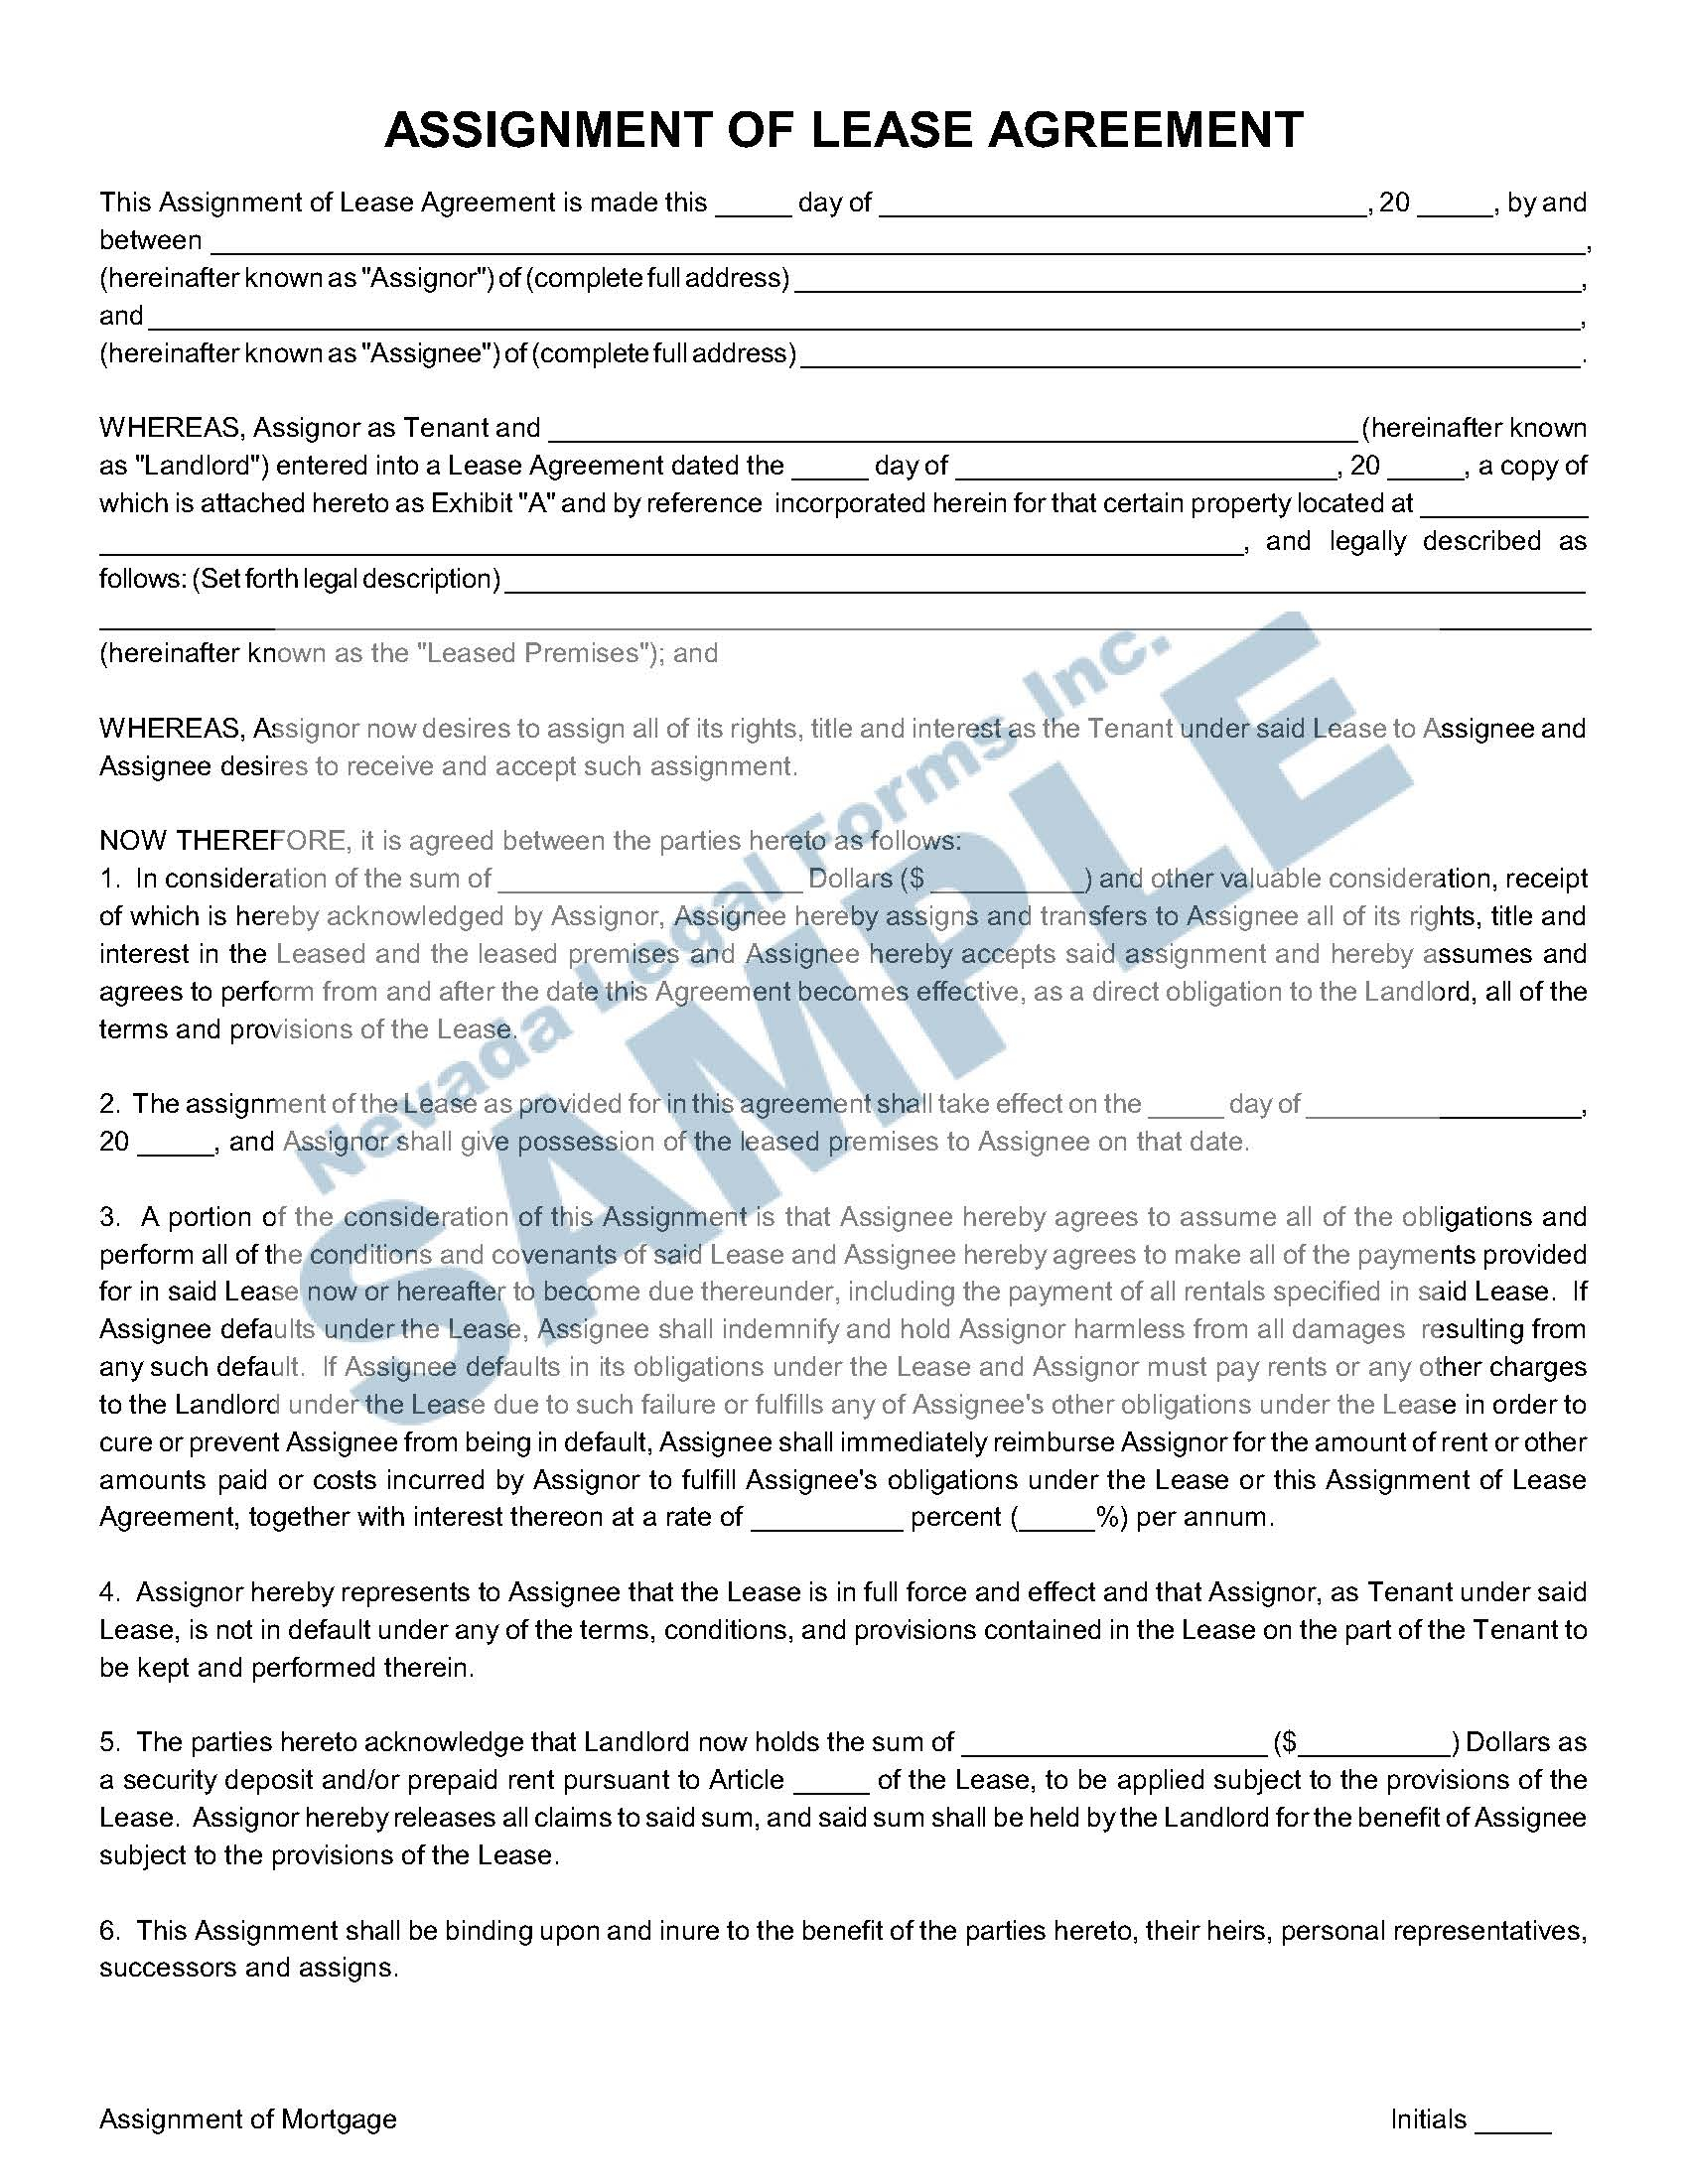 Legal Forms Lease Agreement Assignment Of Lease Agreement